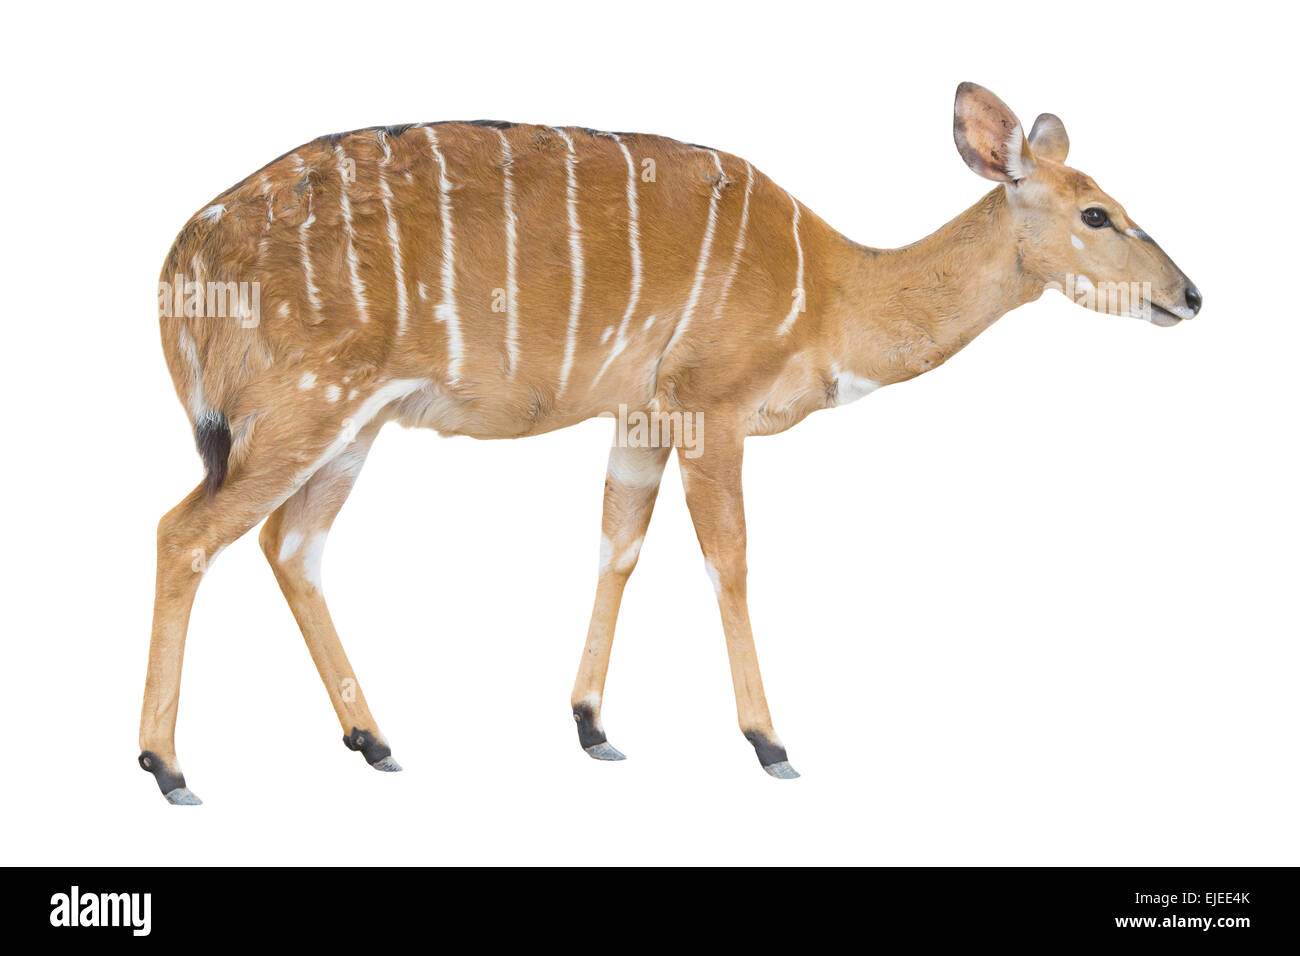 Deer isolated on white background Stock Photo